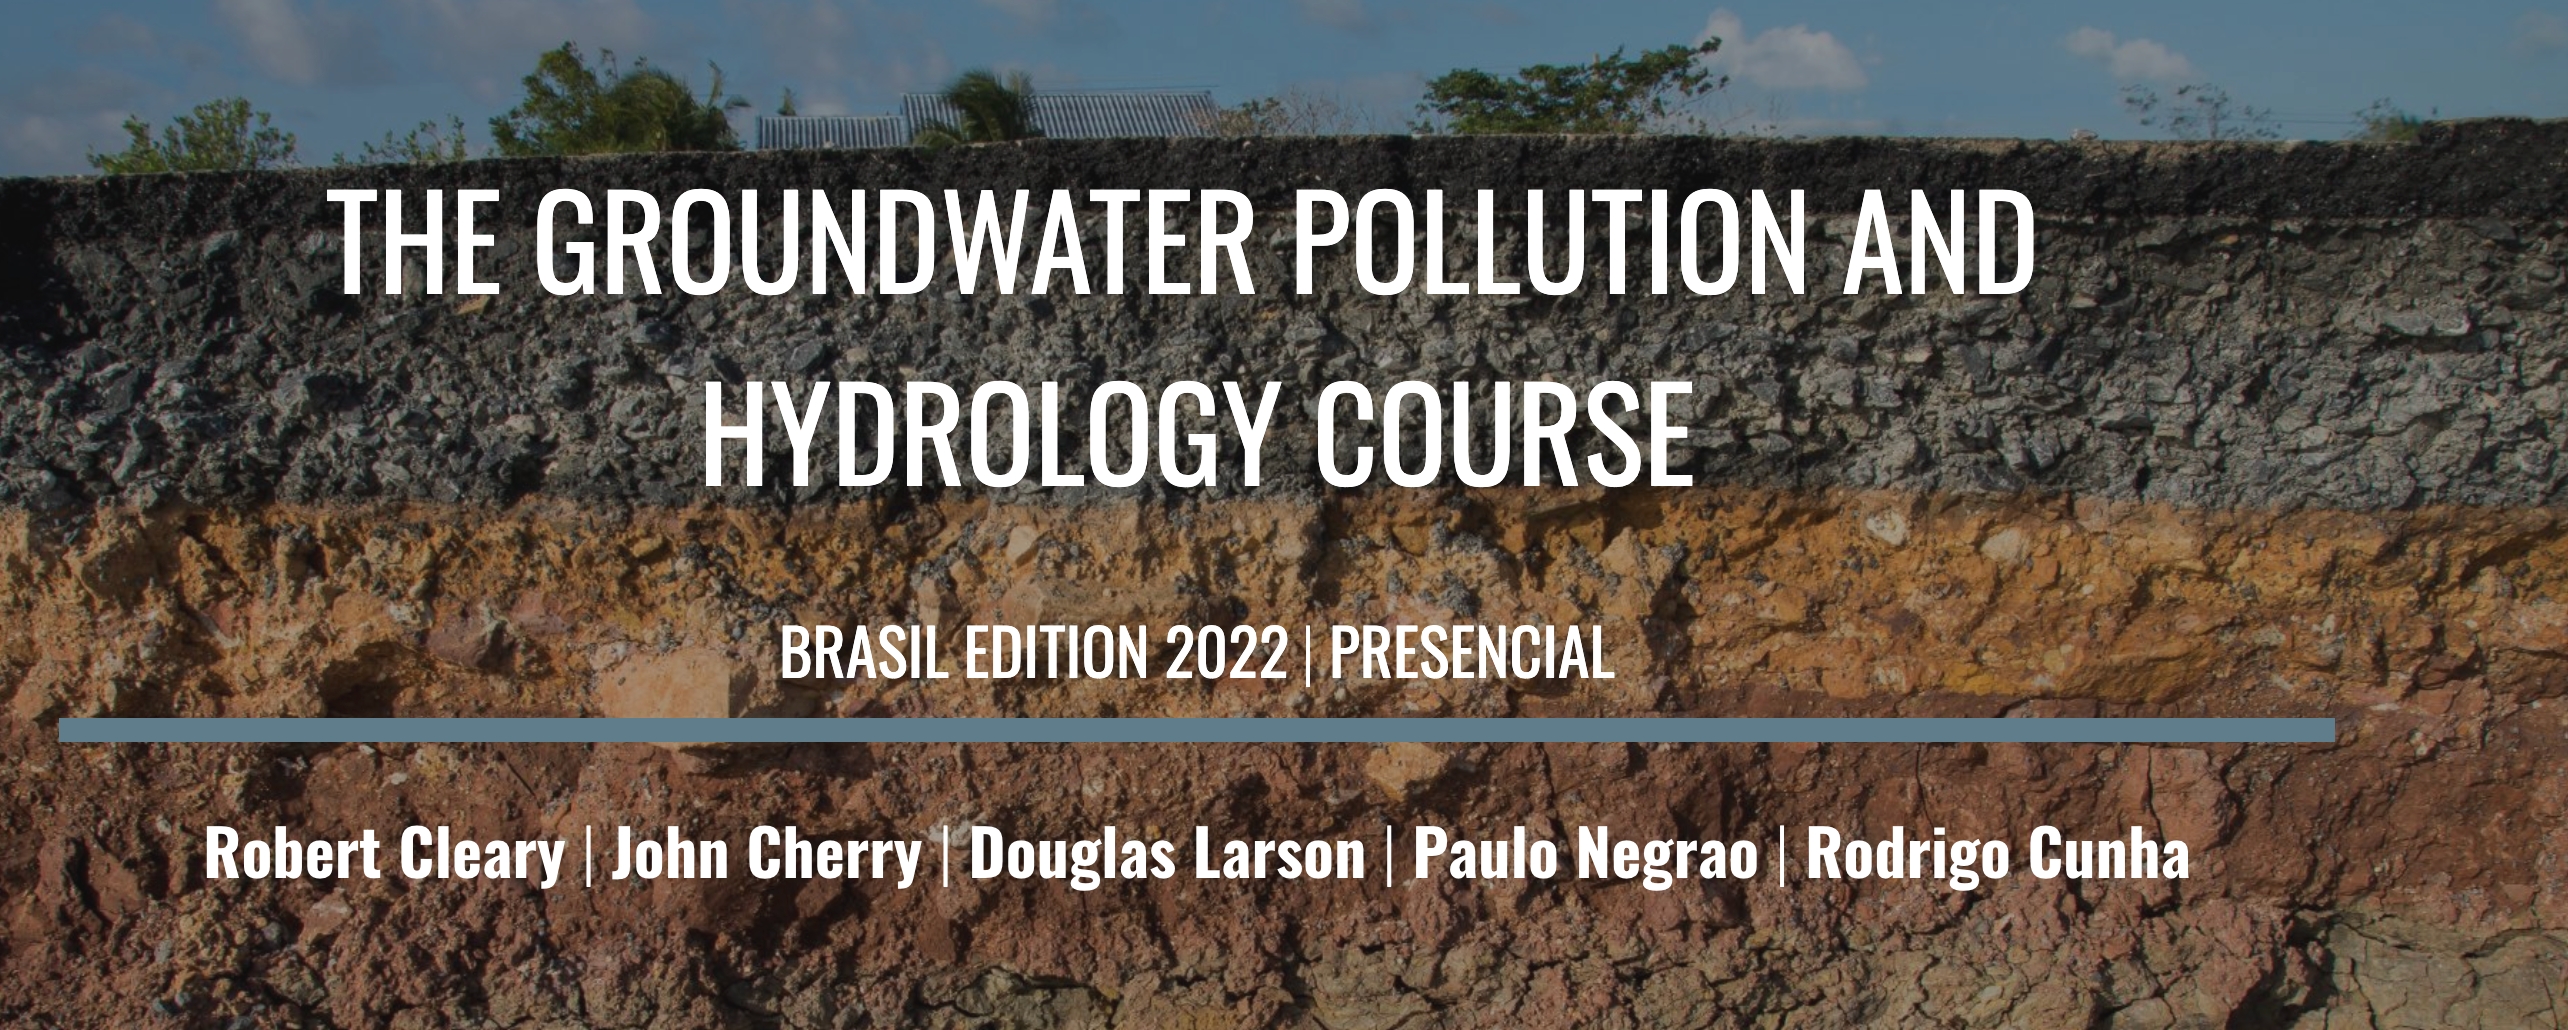 THE GROUNDWATER POLLUTION AND HYDROLOGY COURSE BRASIL EDITION 2022